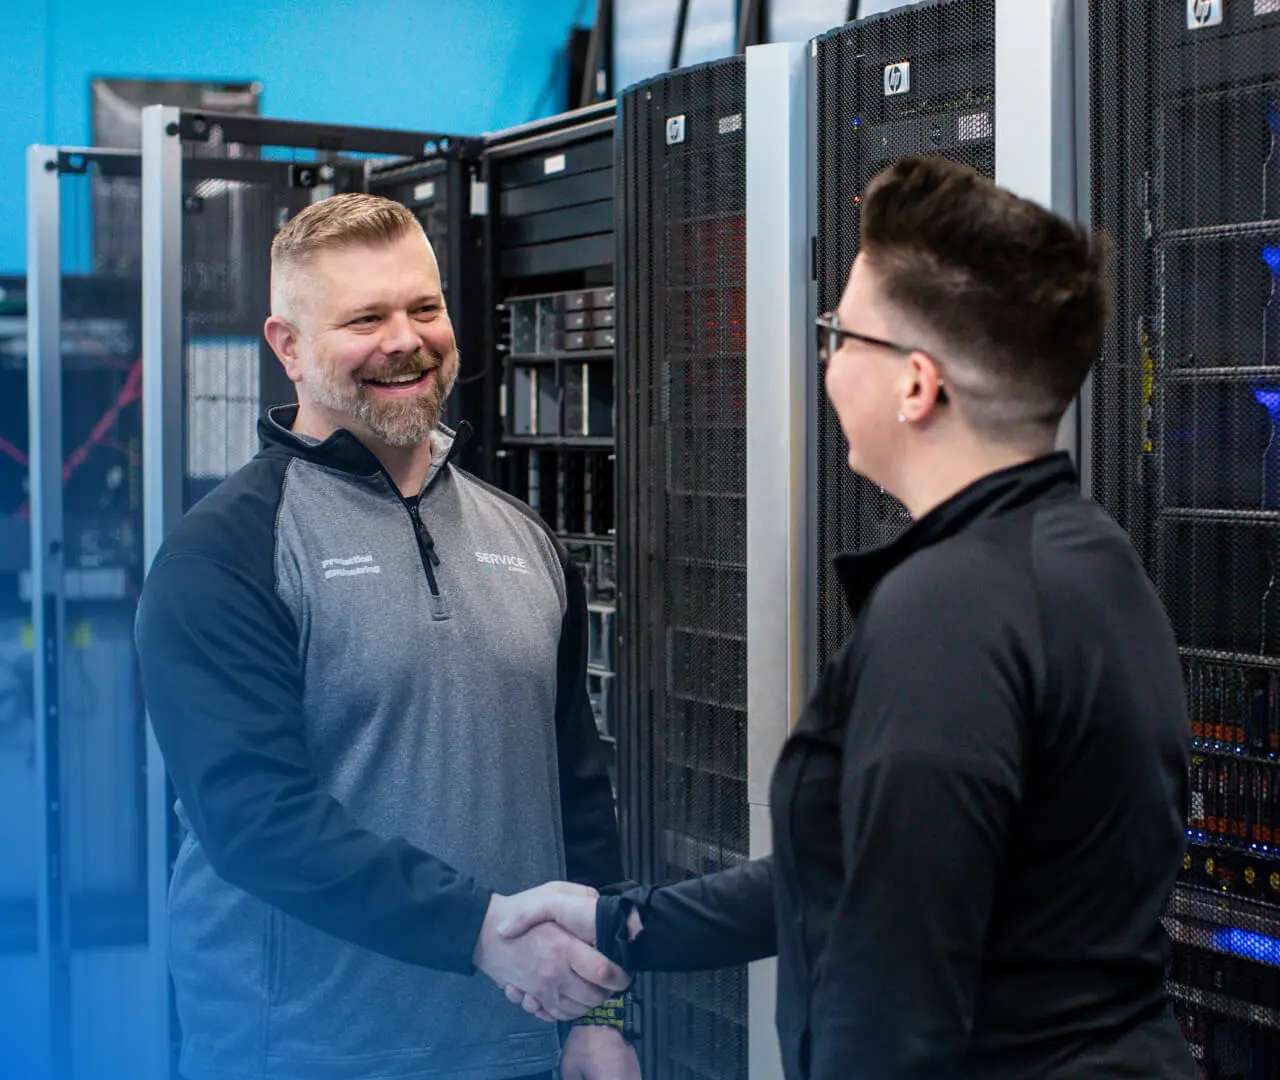 An image of two engineers shaking hands inside a data center in front of large equipment racks